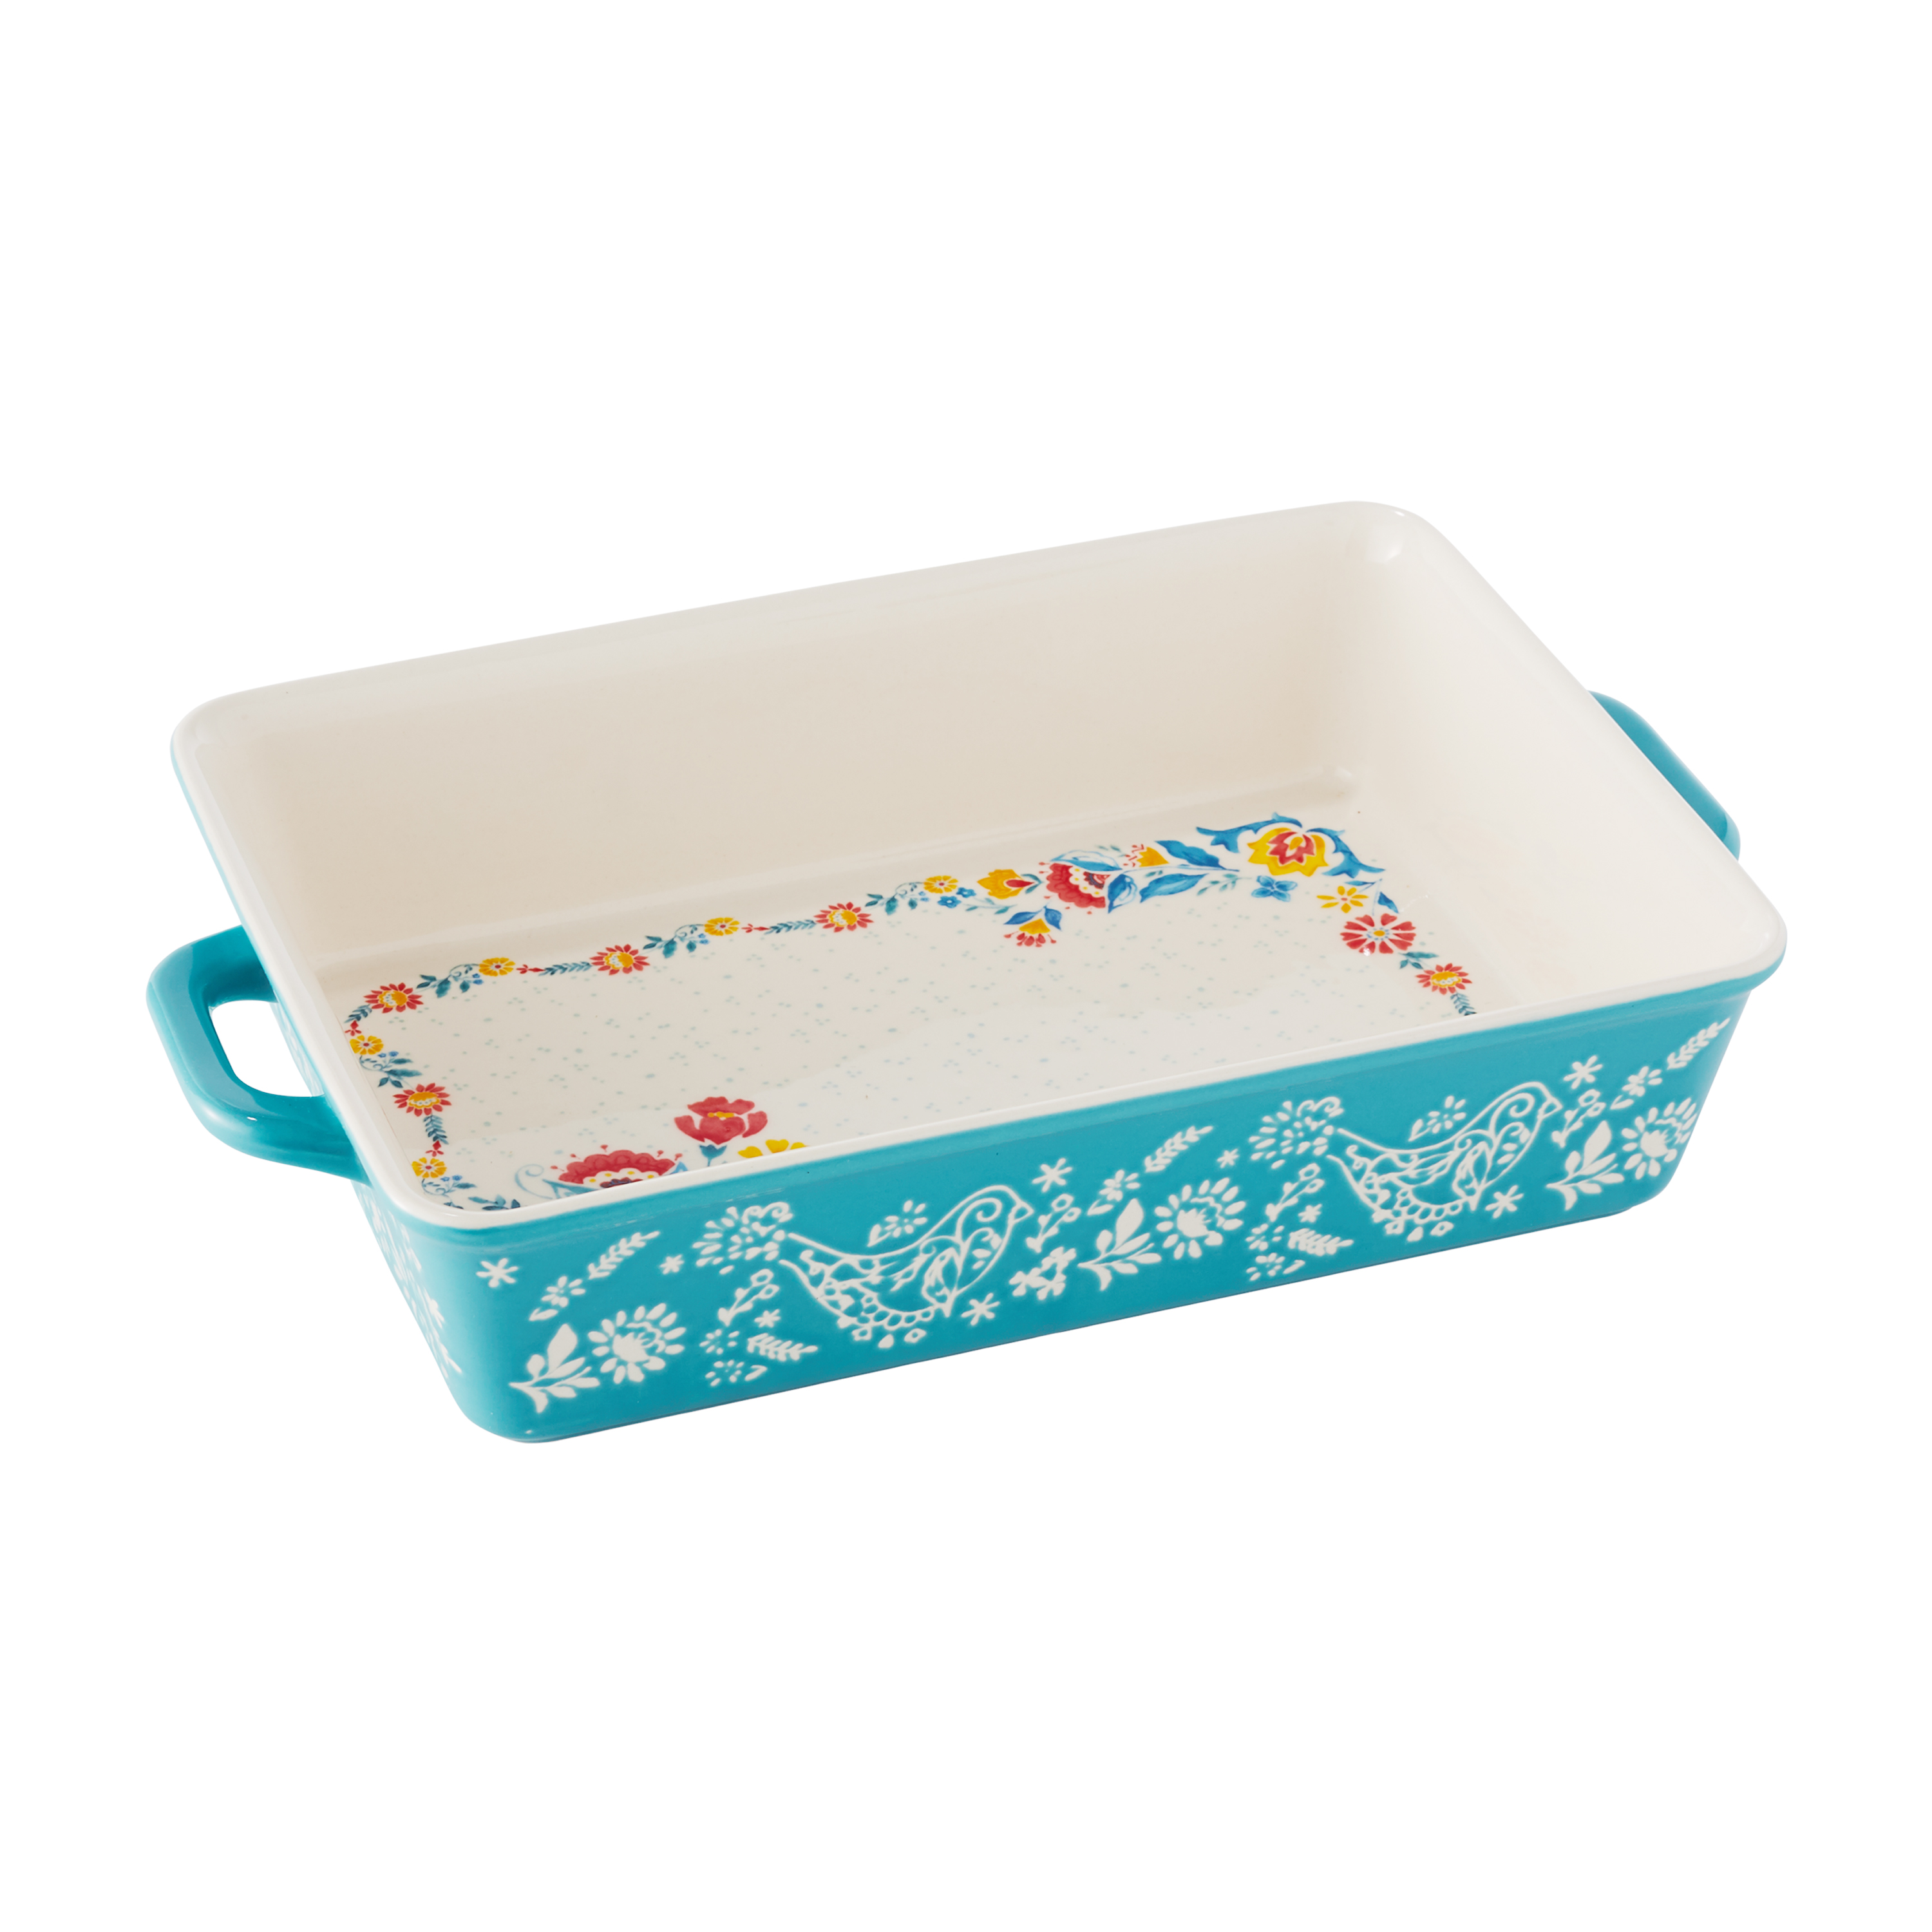 The Pioneer Woman Sweet Romance Blossoms Red, Teal 2-Piece Rectangular Ceramic Baking Dish - image 2 of 11